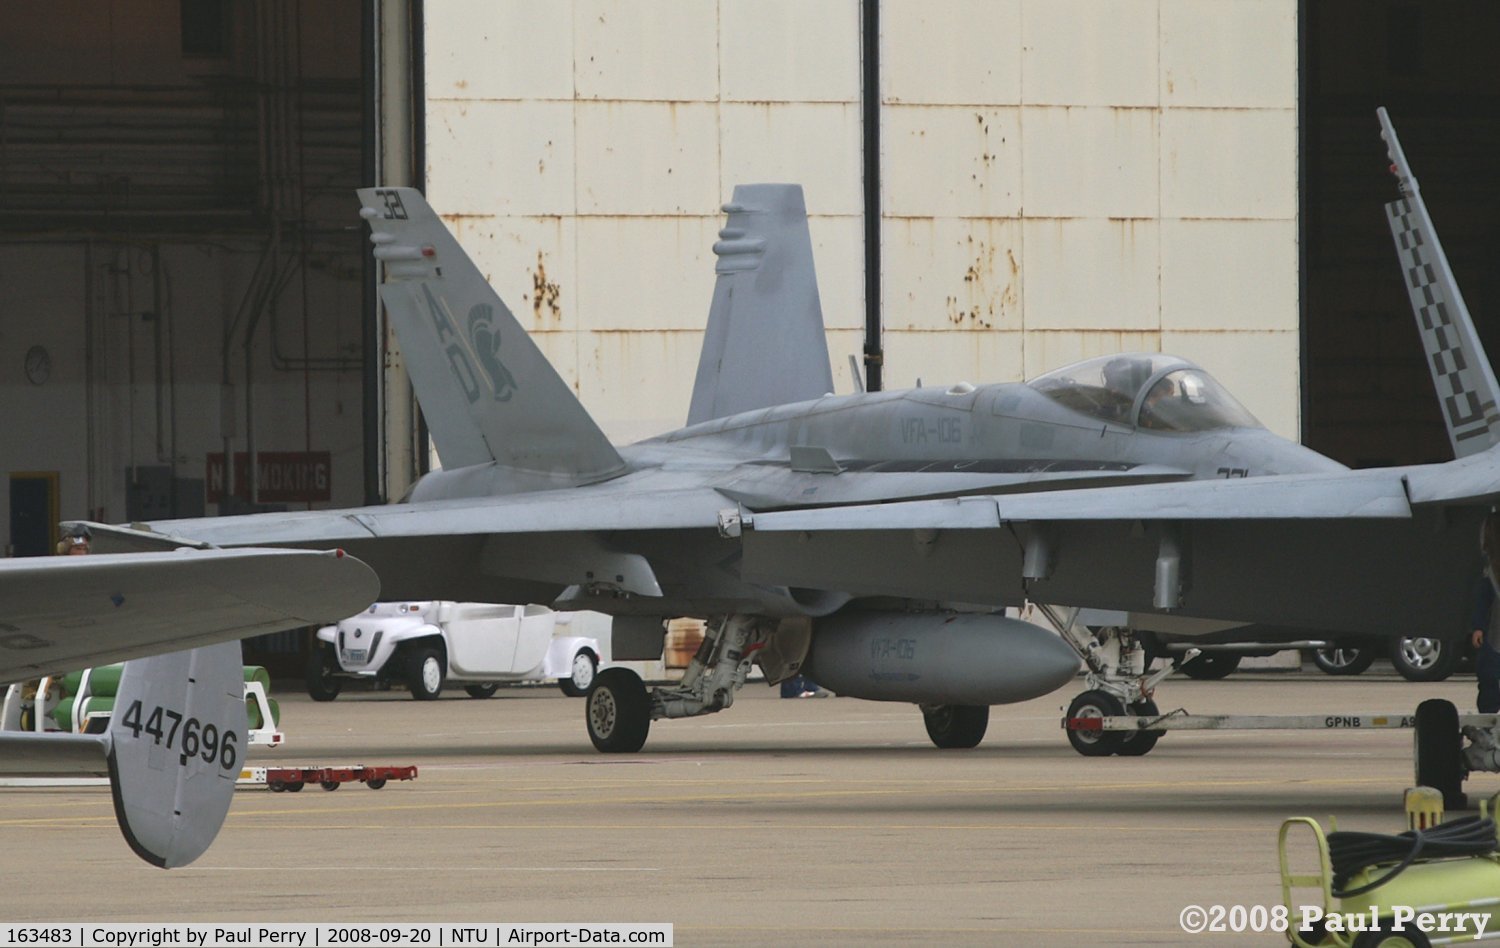 163483, 1988 McDonnell Douglas F/A-18C Hornet C/N 0714/C042, Getting a tow from the back row